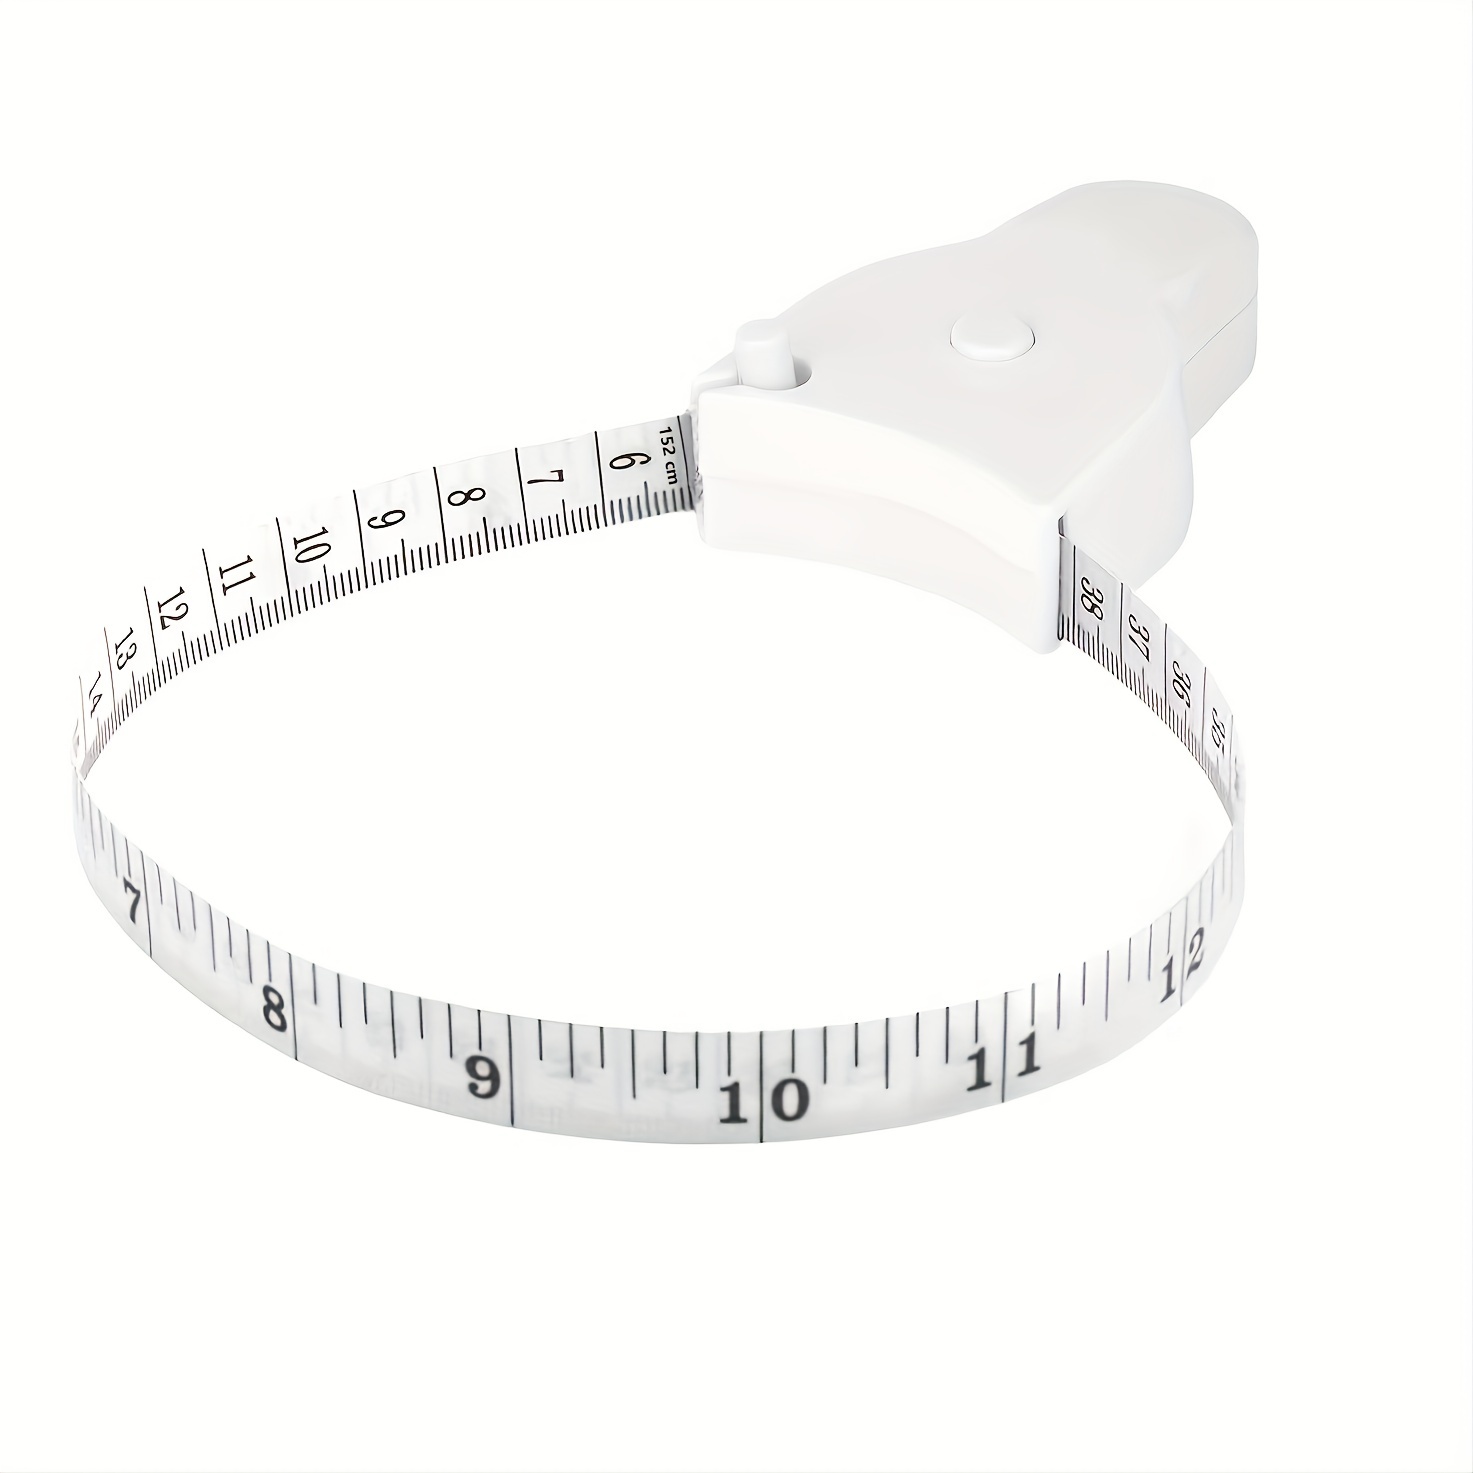  Hroevc Measuring Tape for Body Measurements, Soft Body  Measuring Tape Weight Loss, Retractable Body Tape Measure 60Inch(150cm) :  Arts, Crafts & Sewing